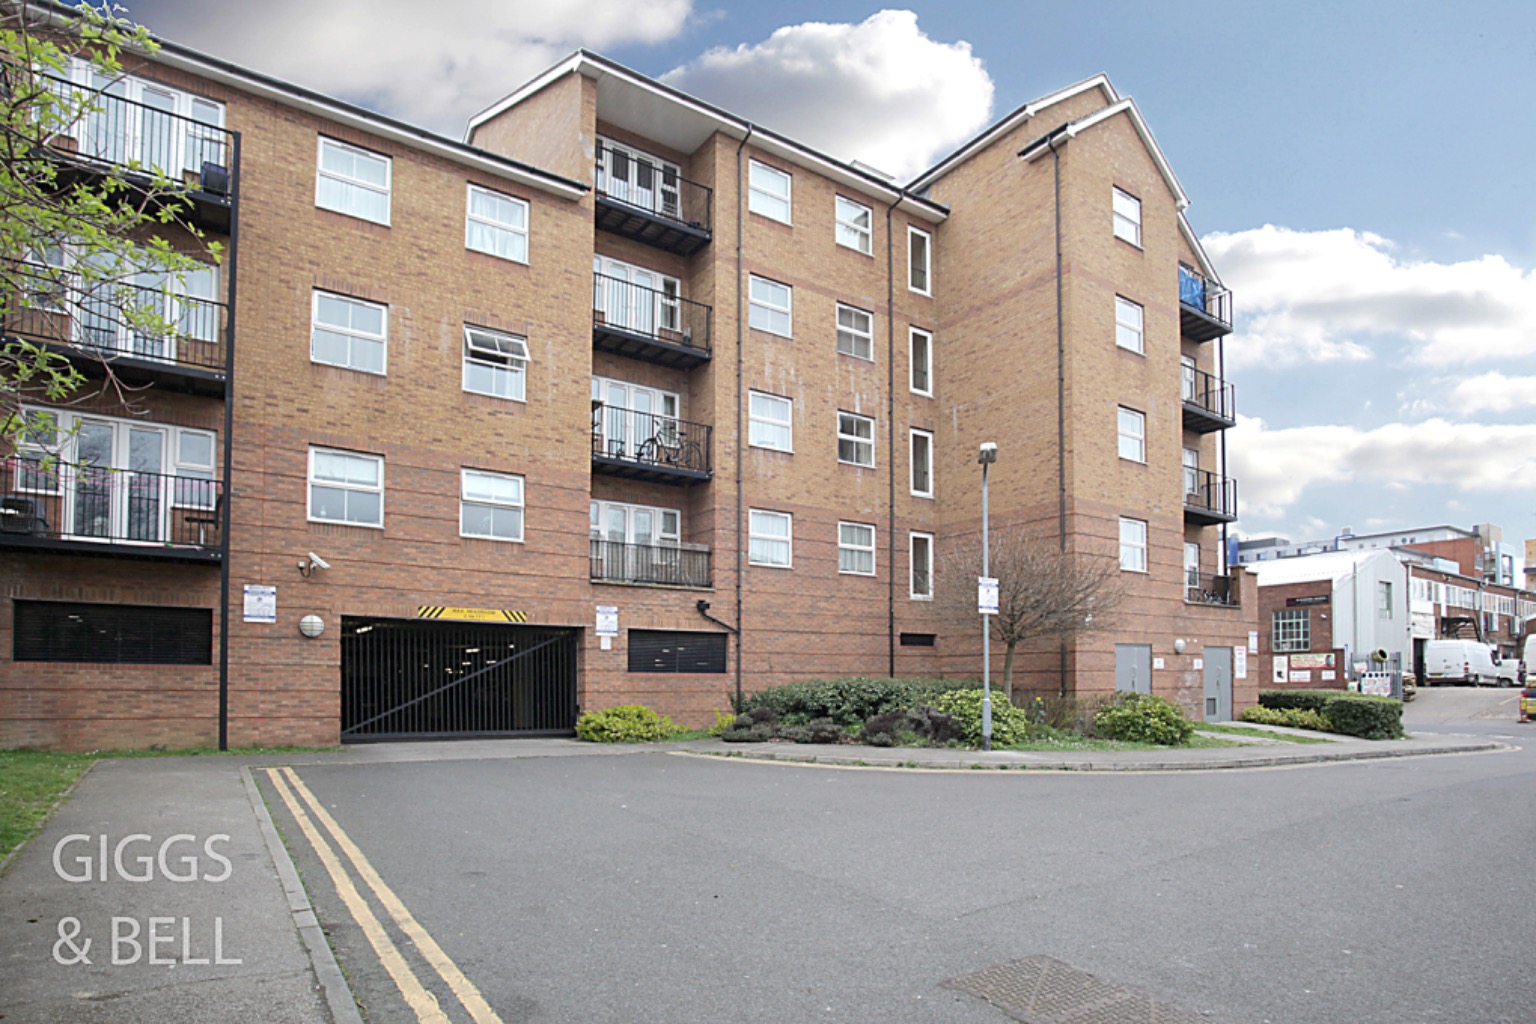 2 bed flat for sale, Luton, LU1 